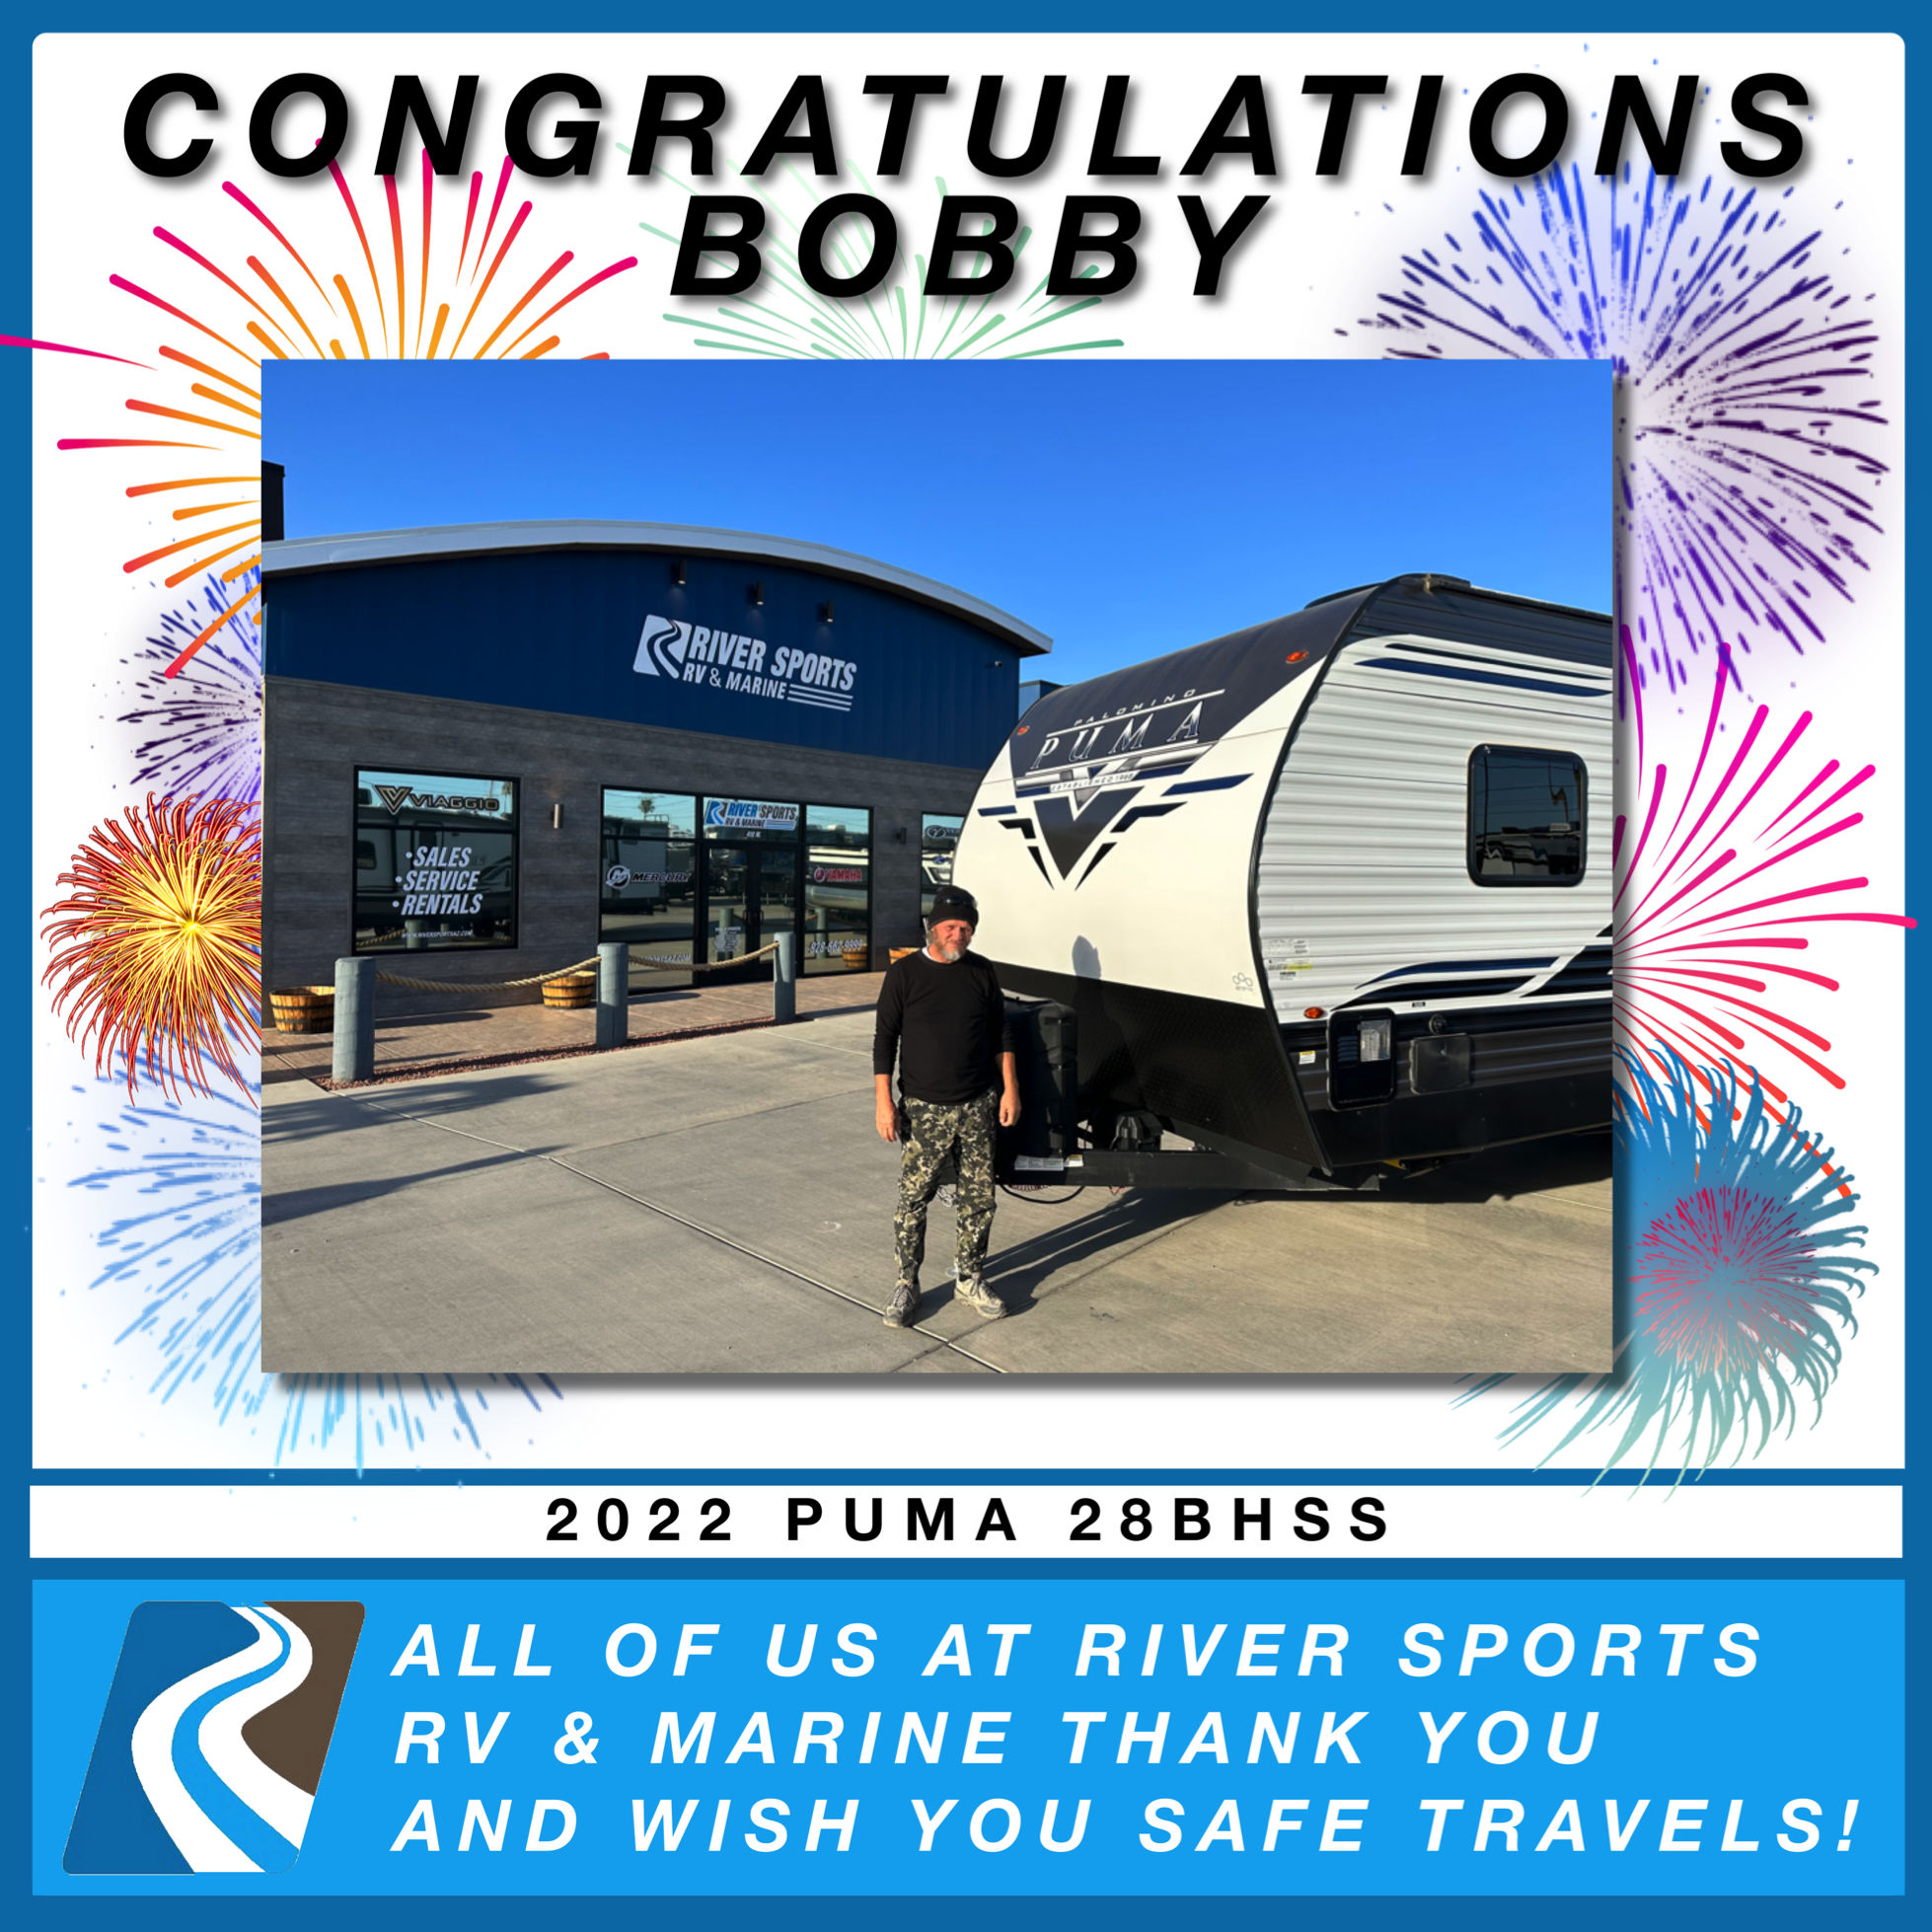 Bobby with his Puma 28BHSS from River Sports RV and Marine